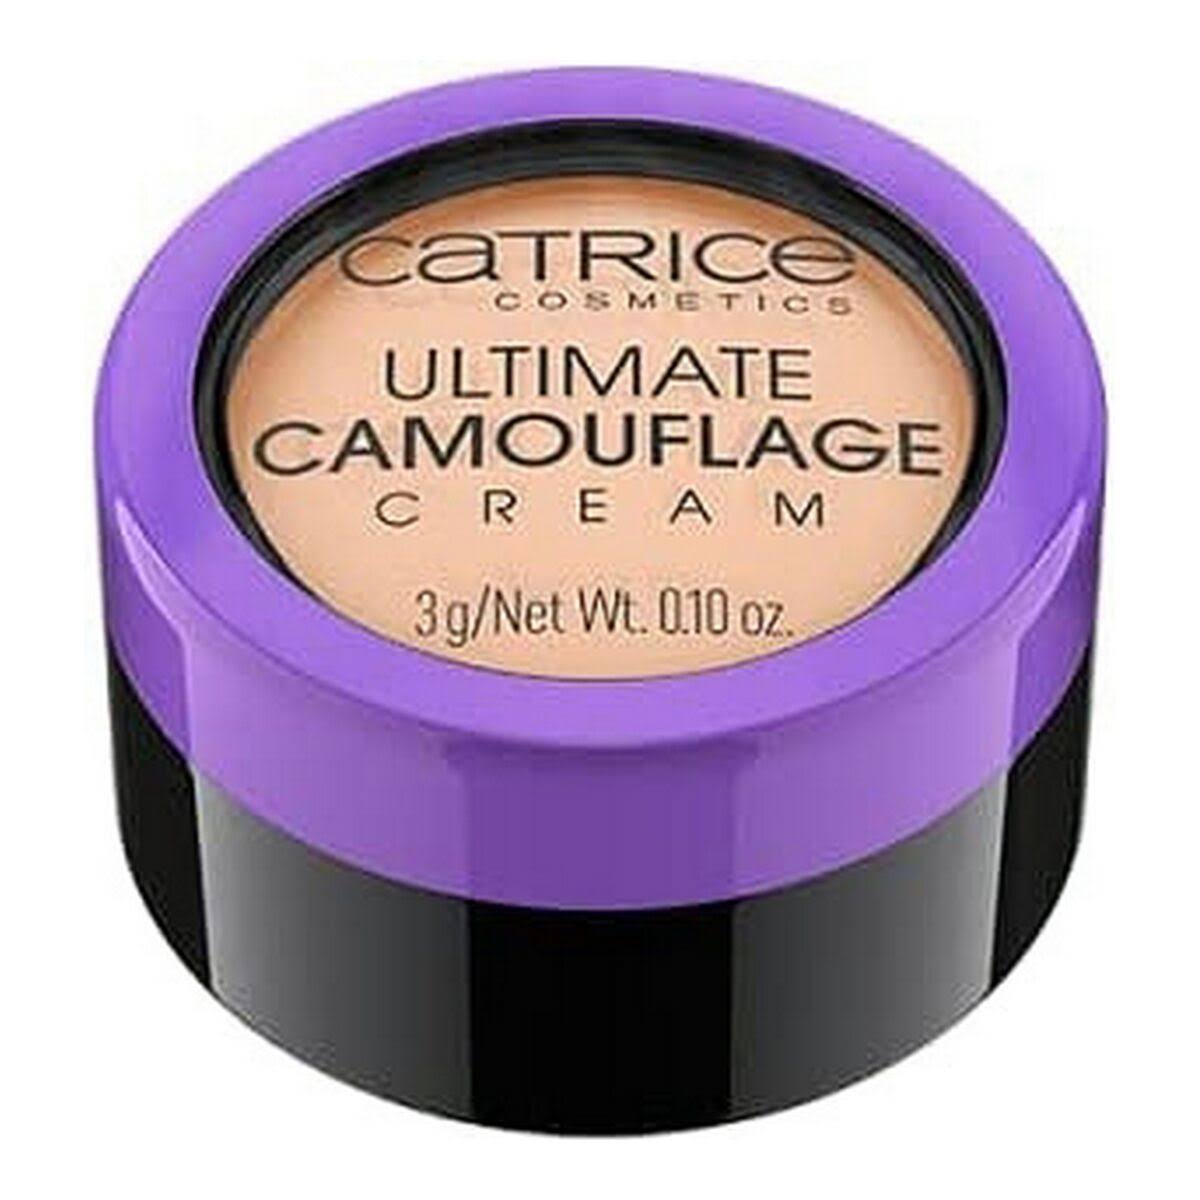 Catrice Ultimate Camouflage Cream Concealer Color 010N Ivory 3g